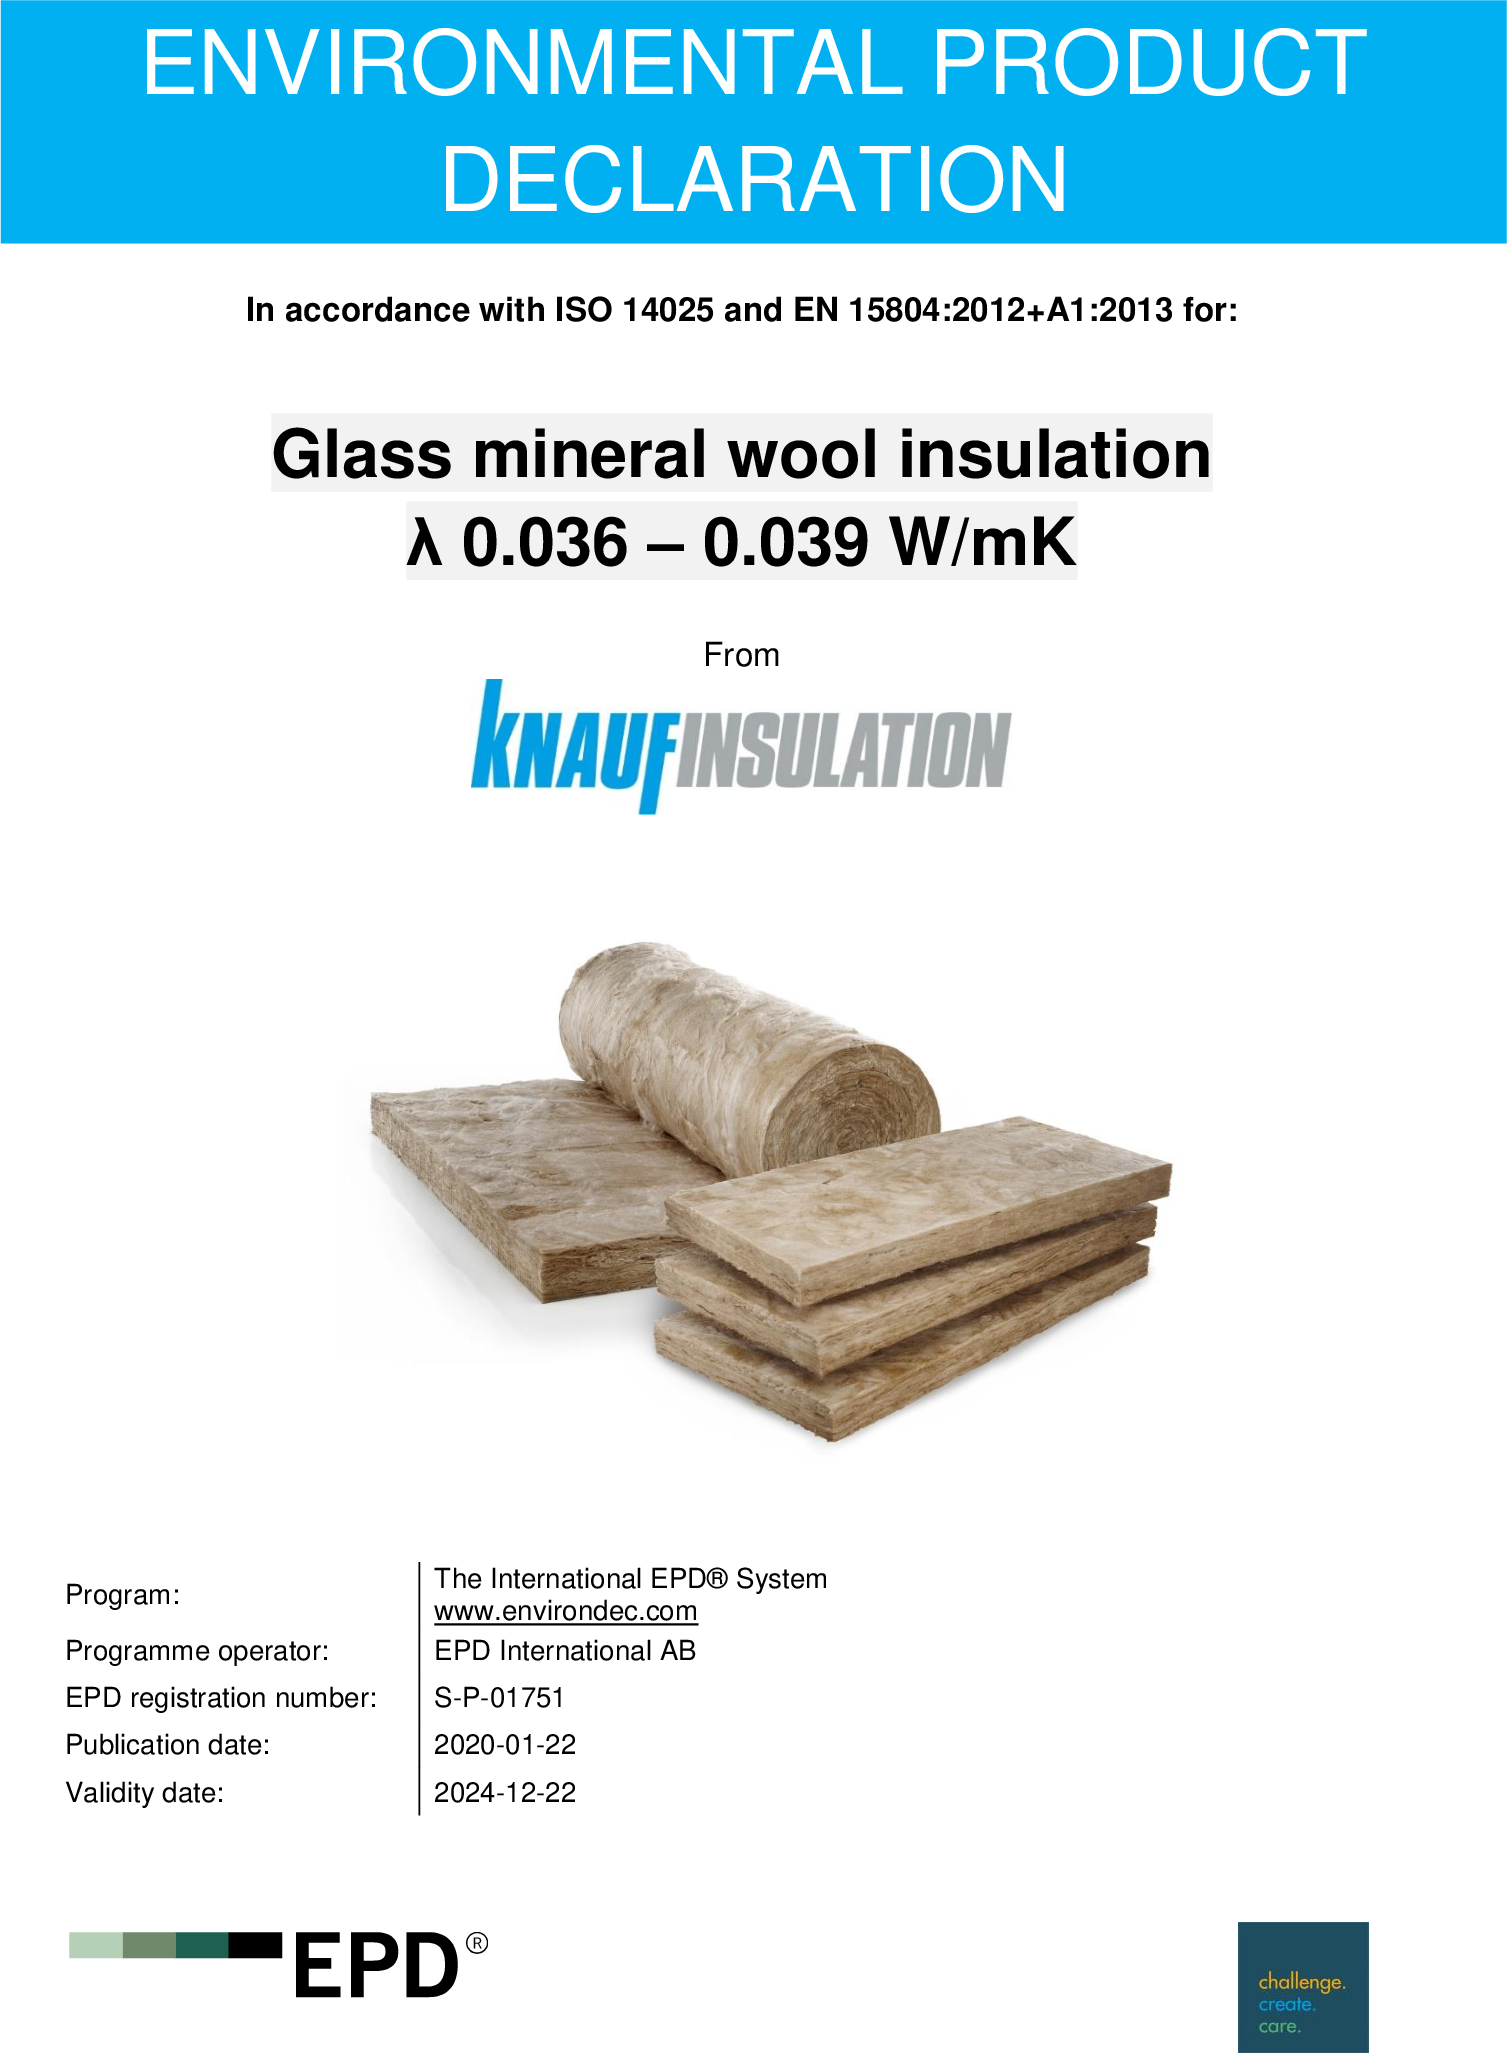 Environment Product Declaration (EPD) - Glass Mineral Wool 0.036 – 0.039 W/mK